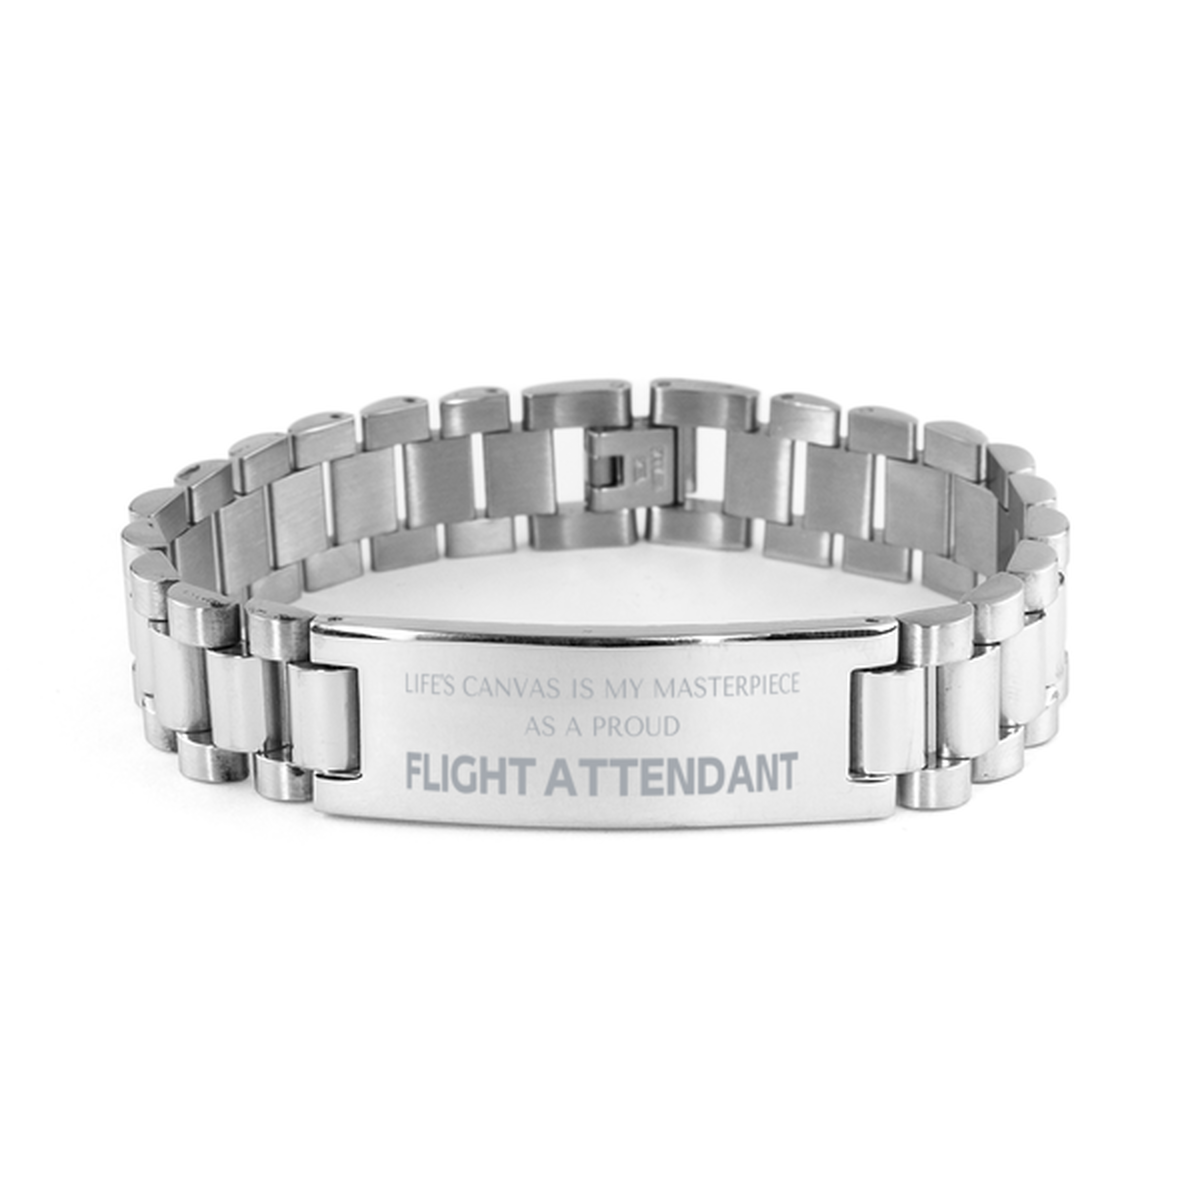 Proud Flight Attendant Gifts, Life's canvas is my masterpiece, Epic Birthday Christmas Unique Ladder Stainless Steel Bracelet For Flight Attendant, Coworkers, Men, Women, Friends